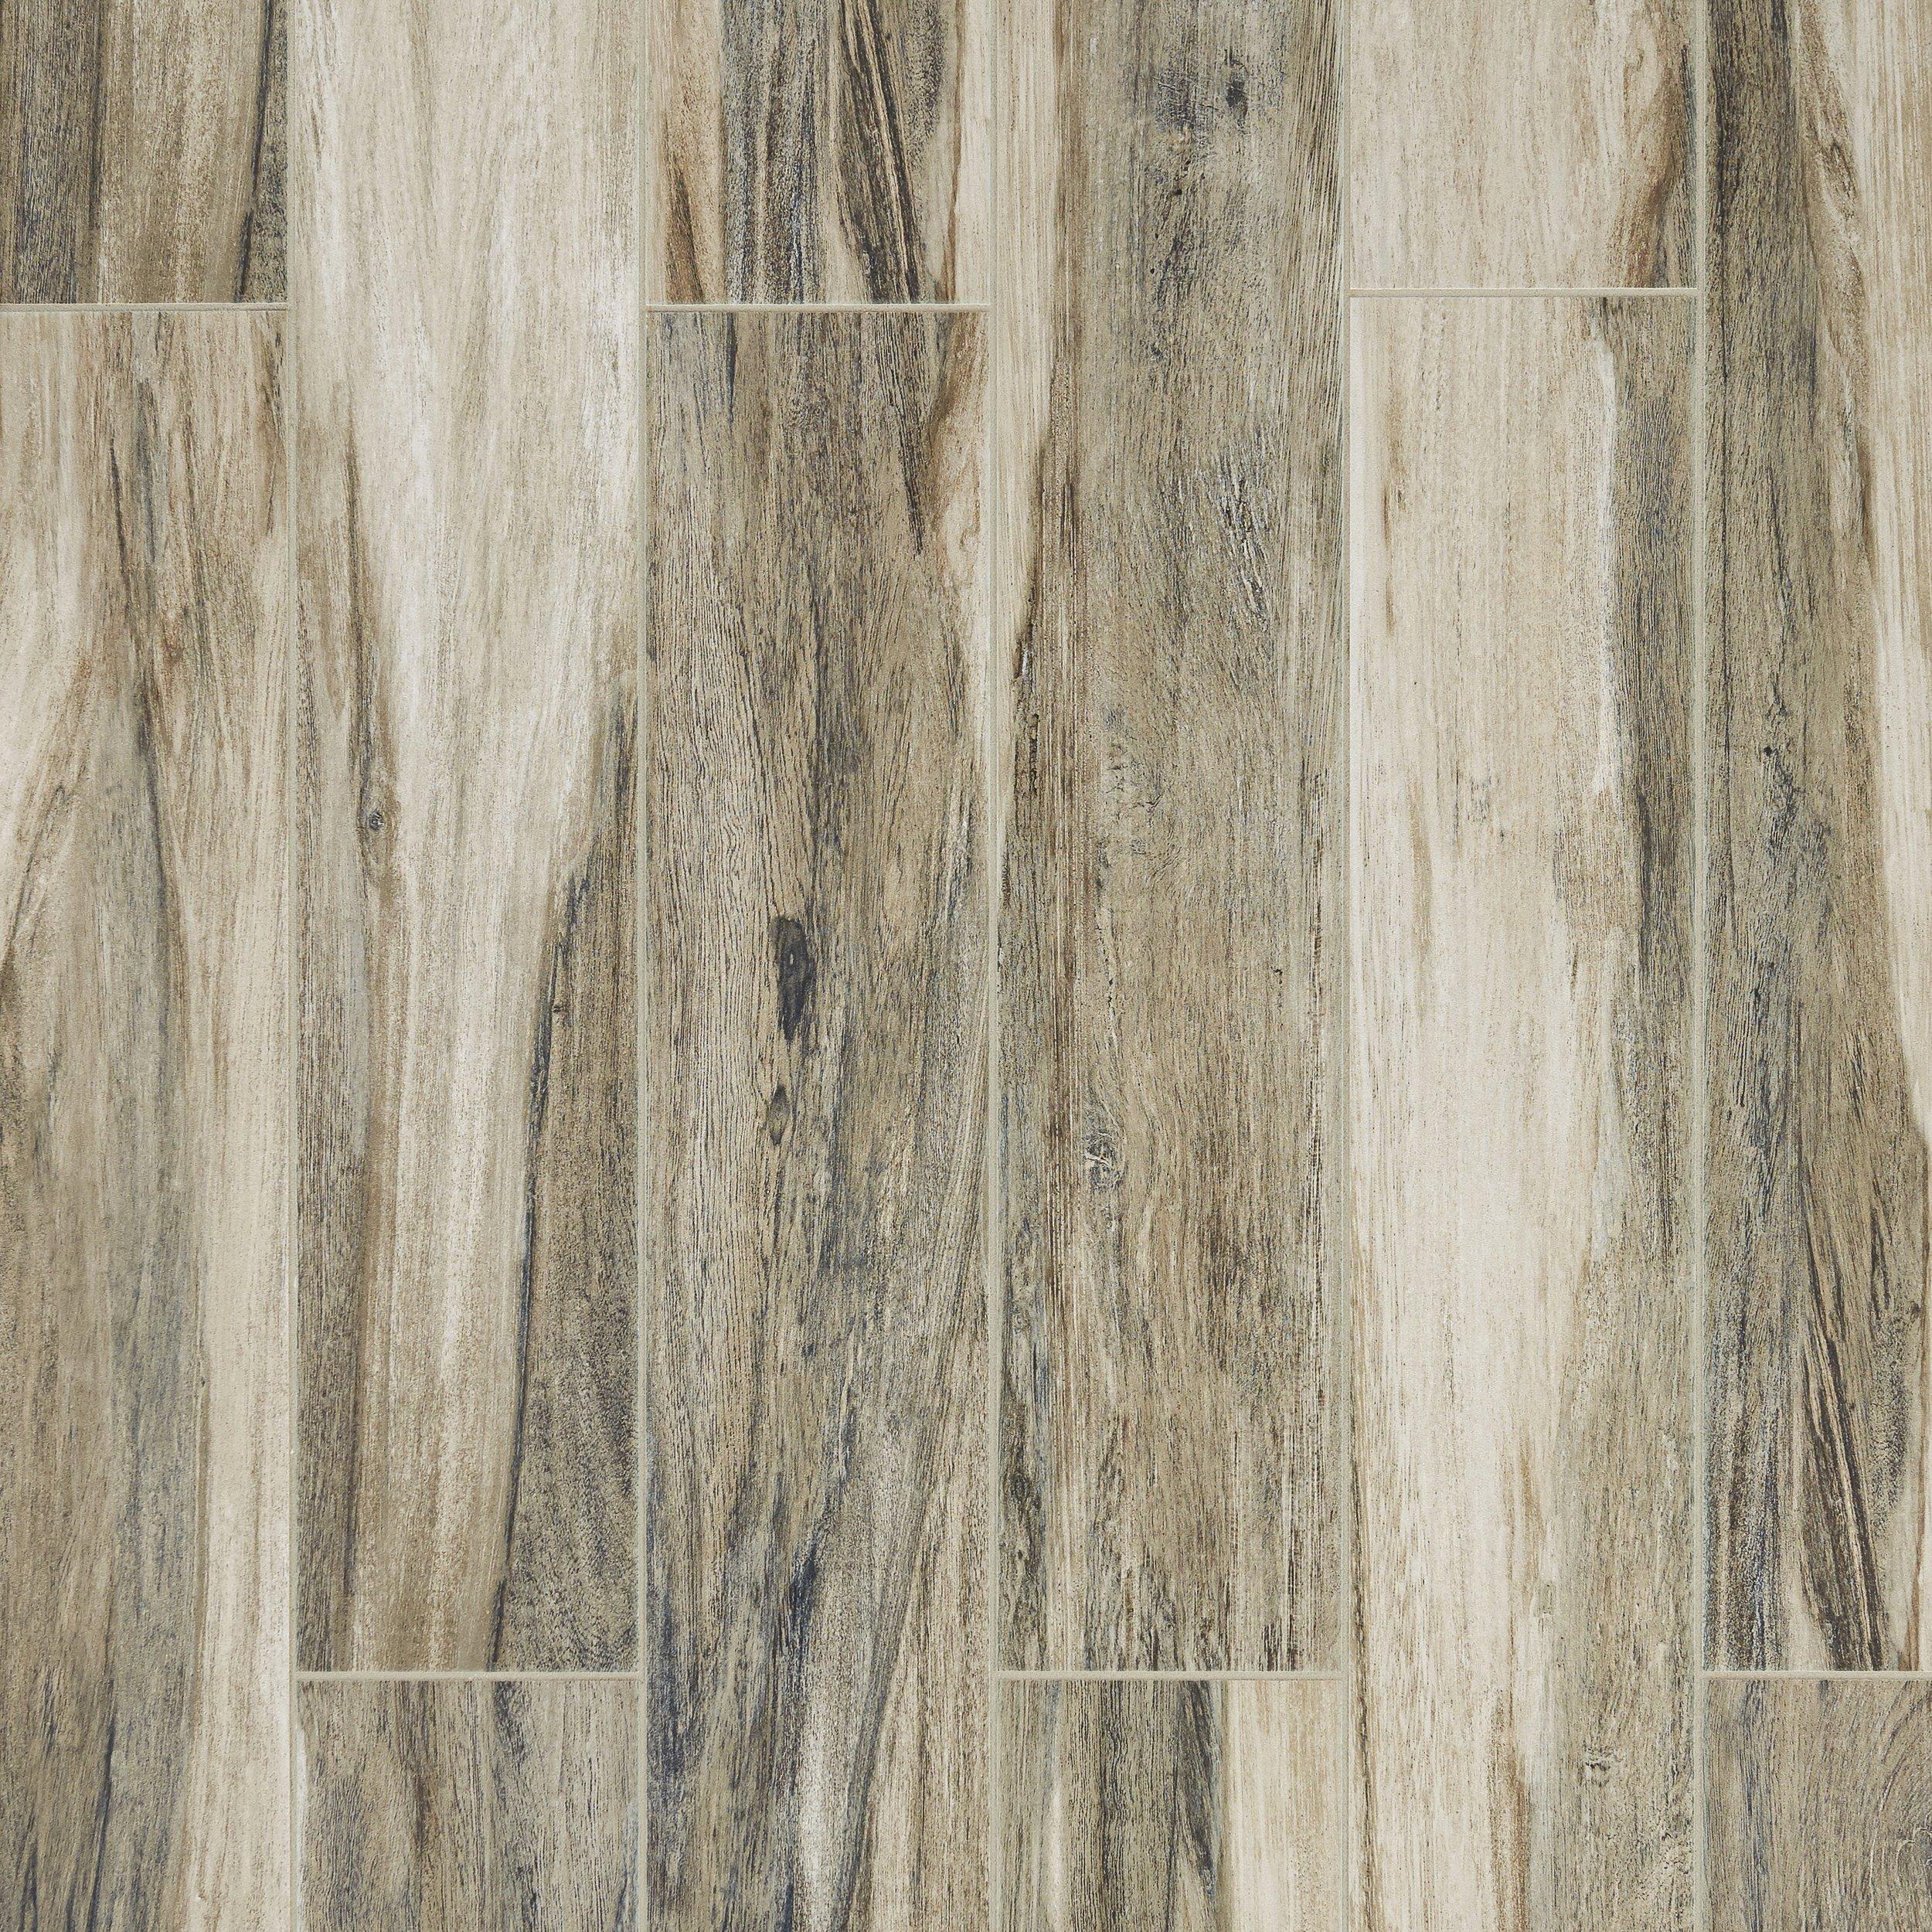 Chesterfield Gray Wood Plank Ceramic Tile 6 X 36 100213123